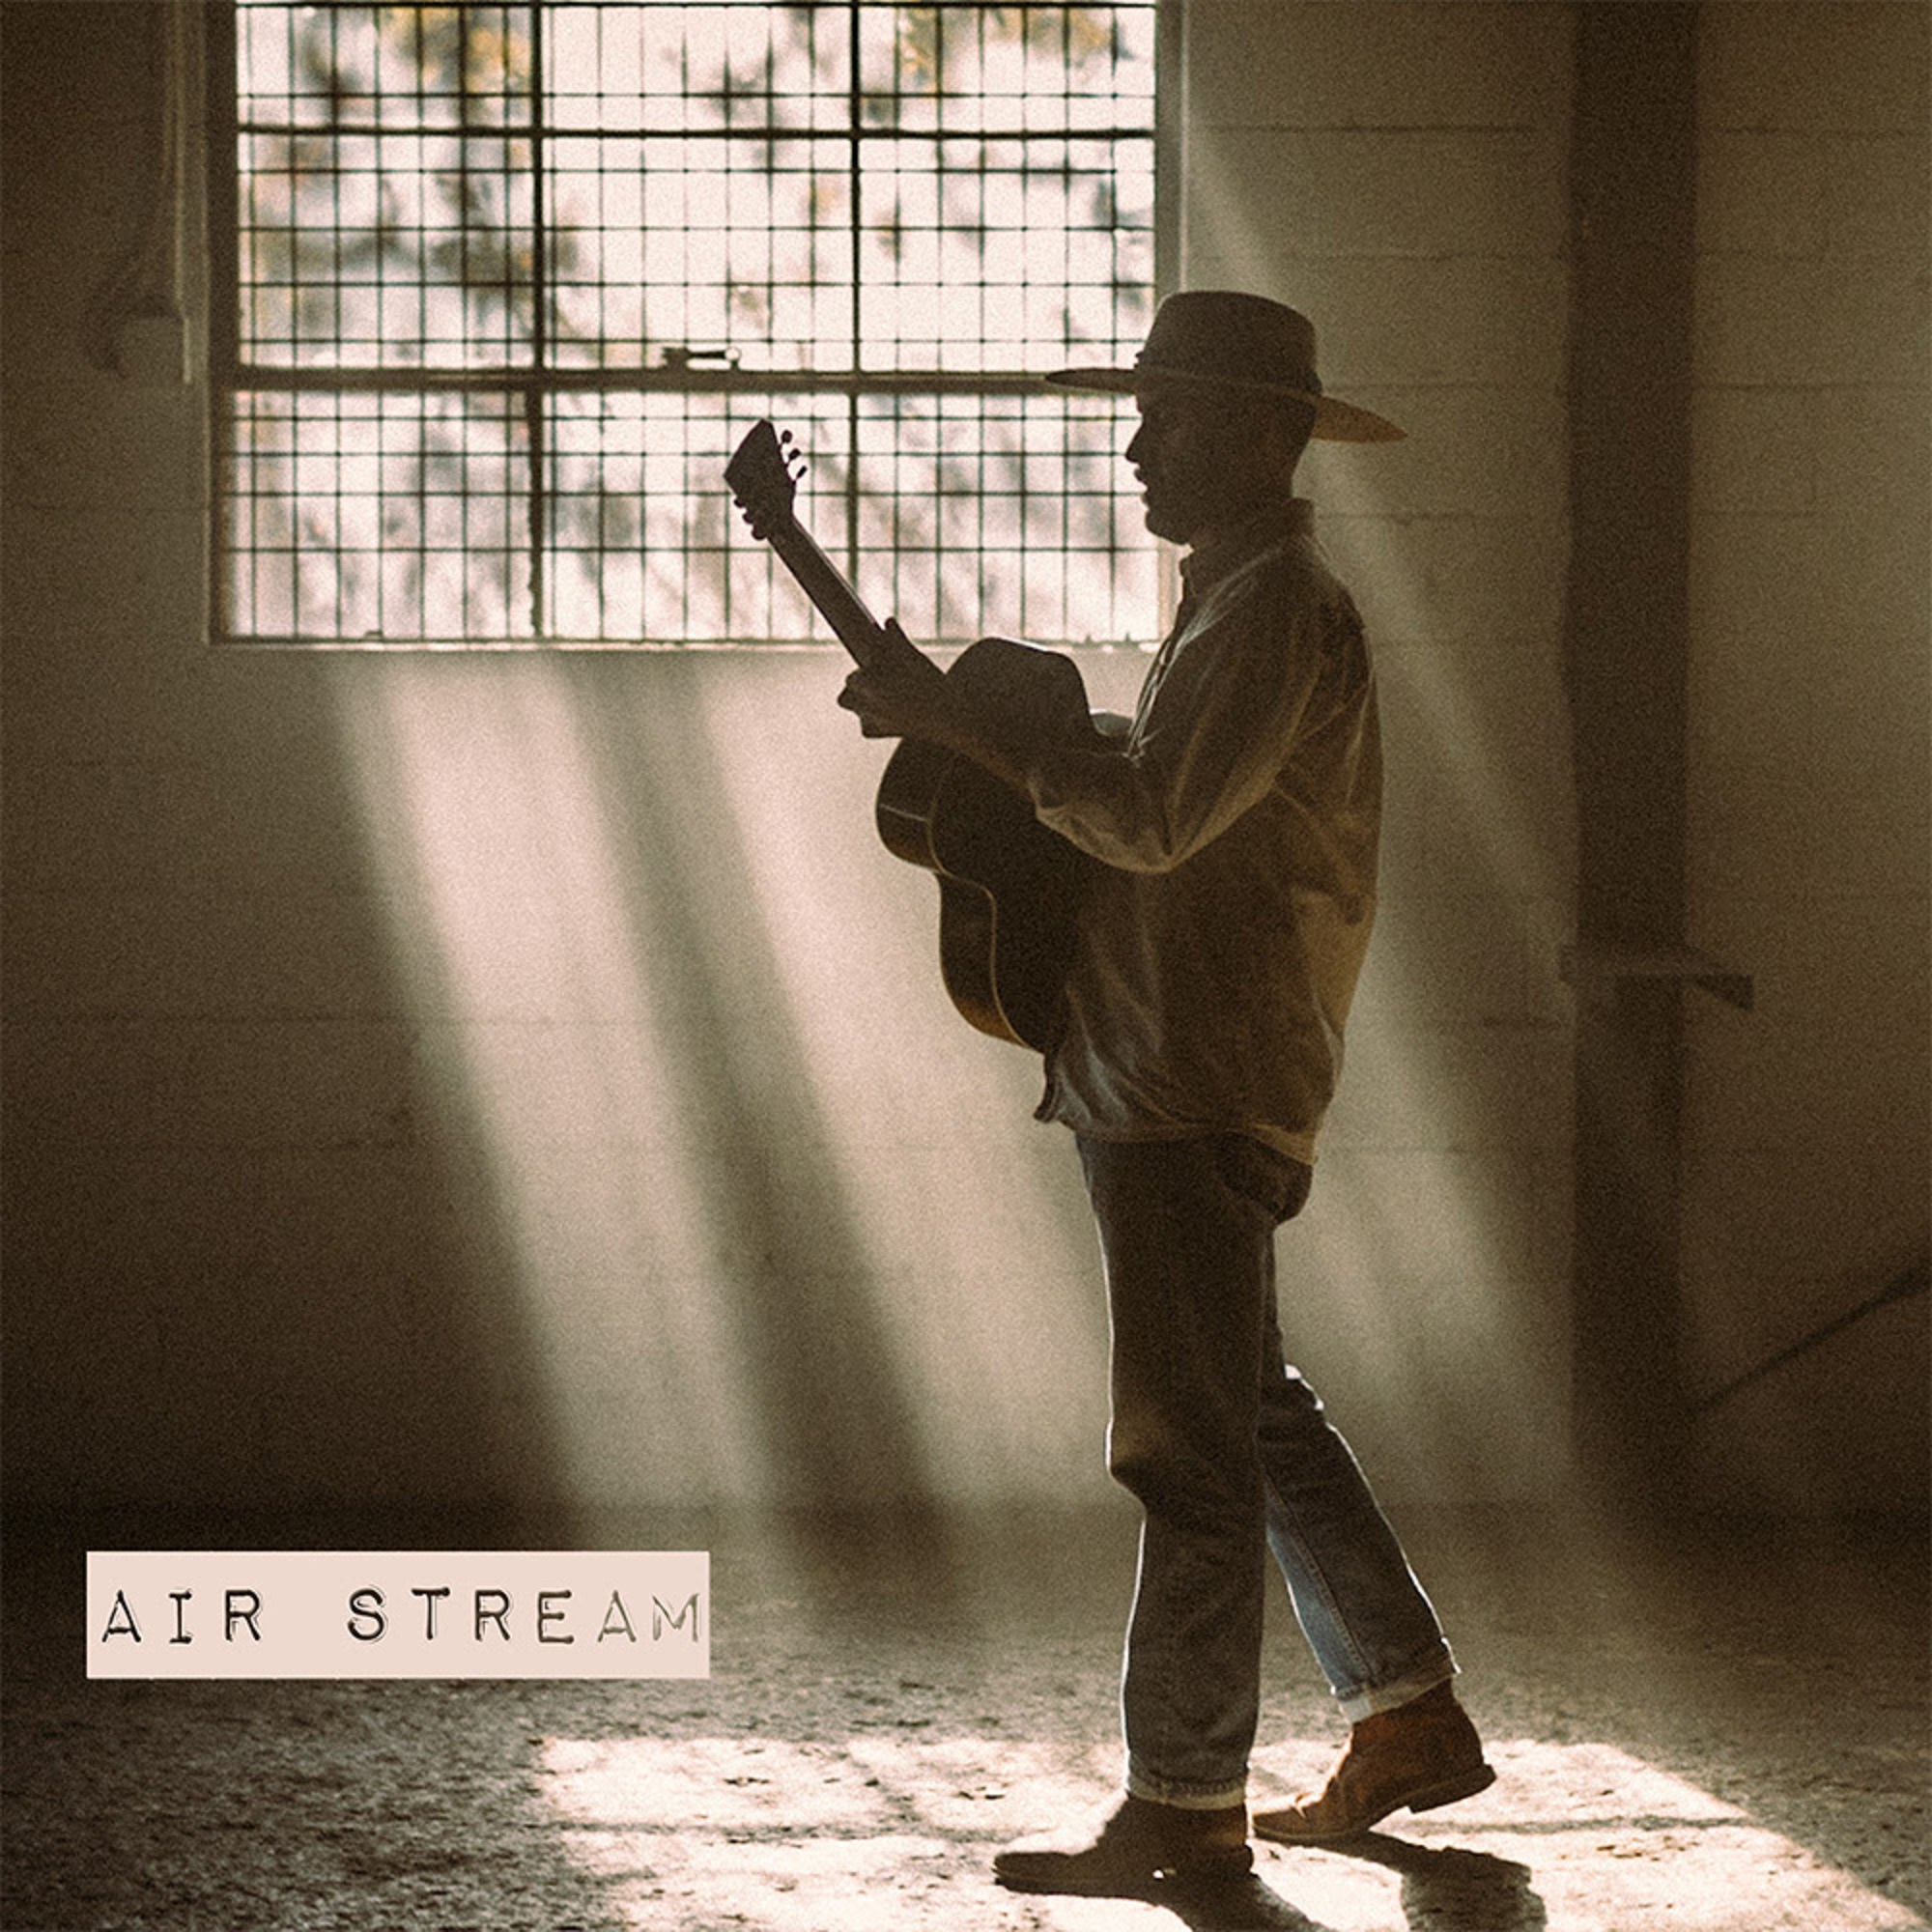 Parker Smith releases new single "Air Stream"